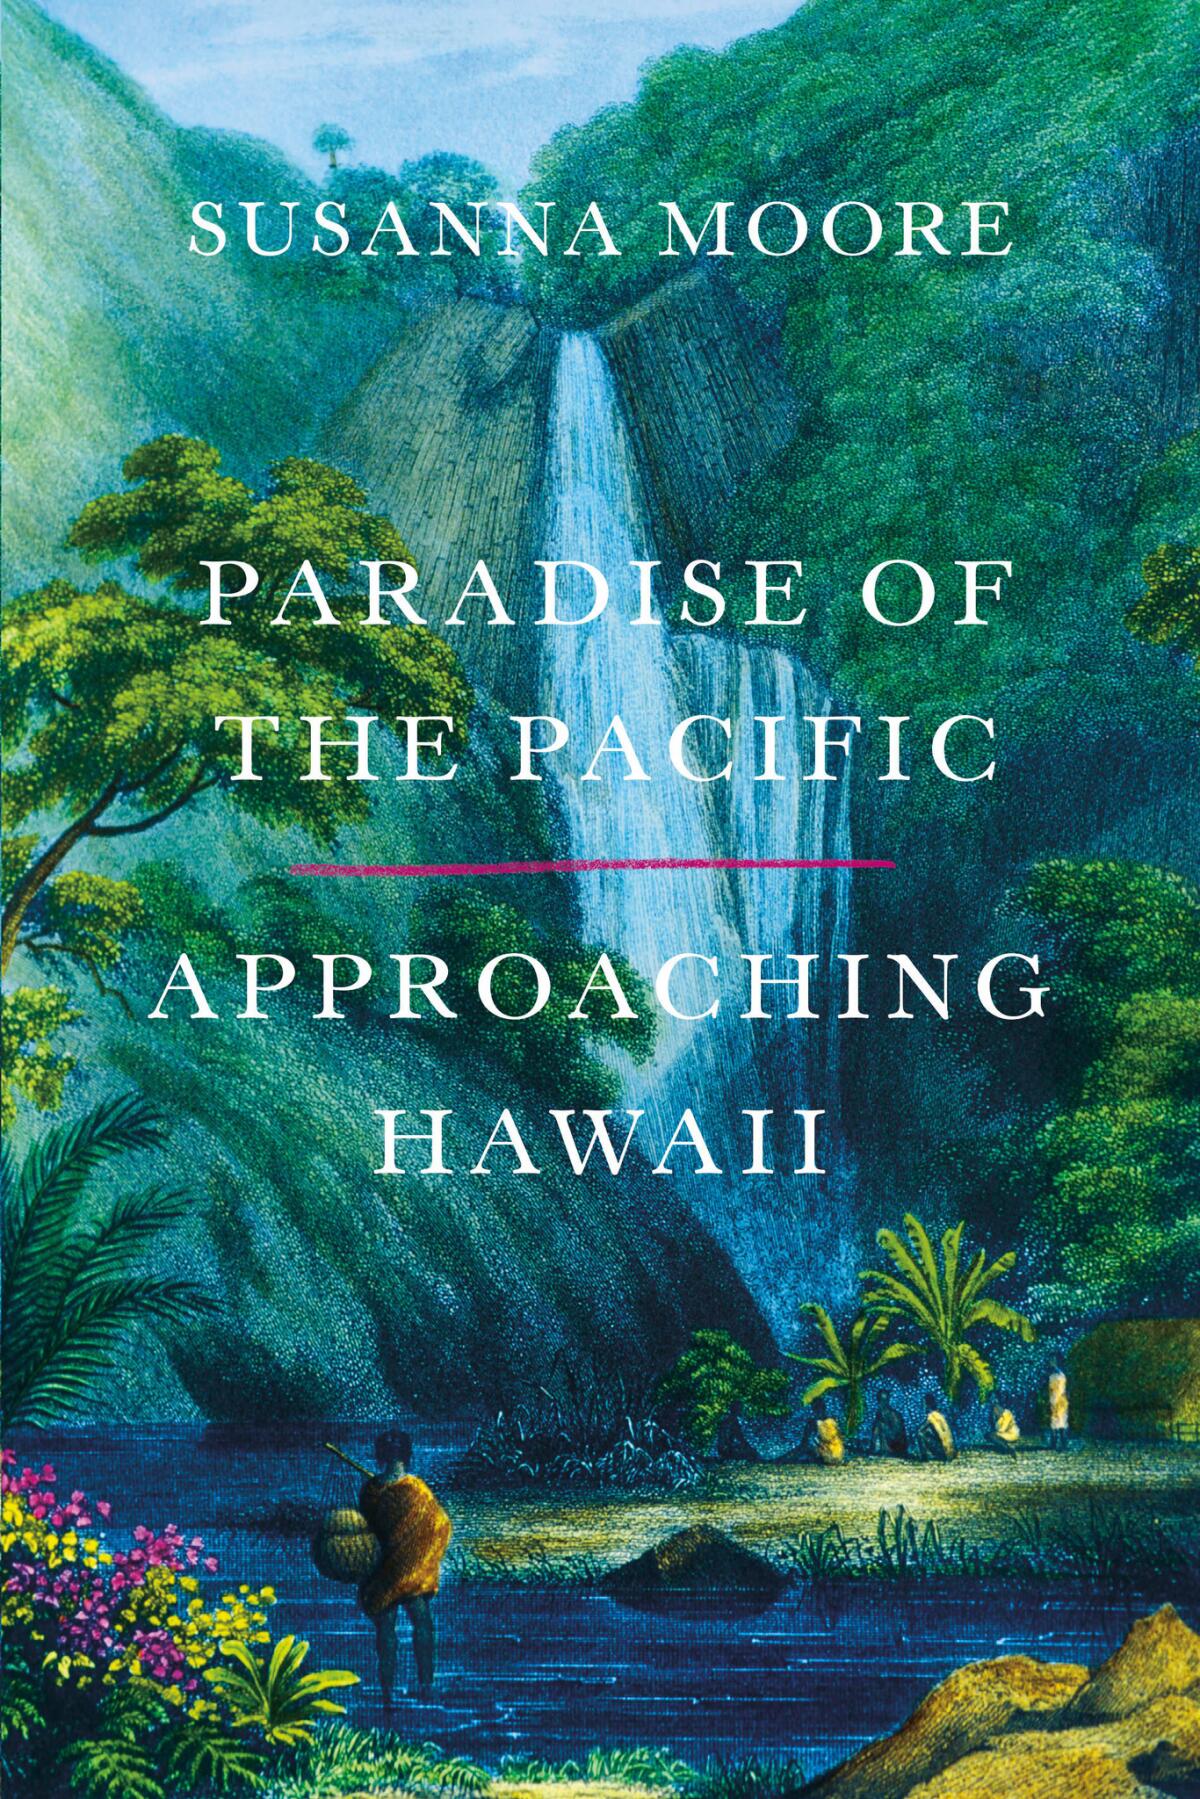 Paradise of the Pacific: Approaching Hawaii by Susanna Moore.